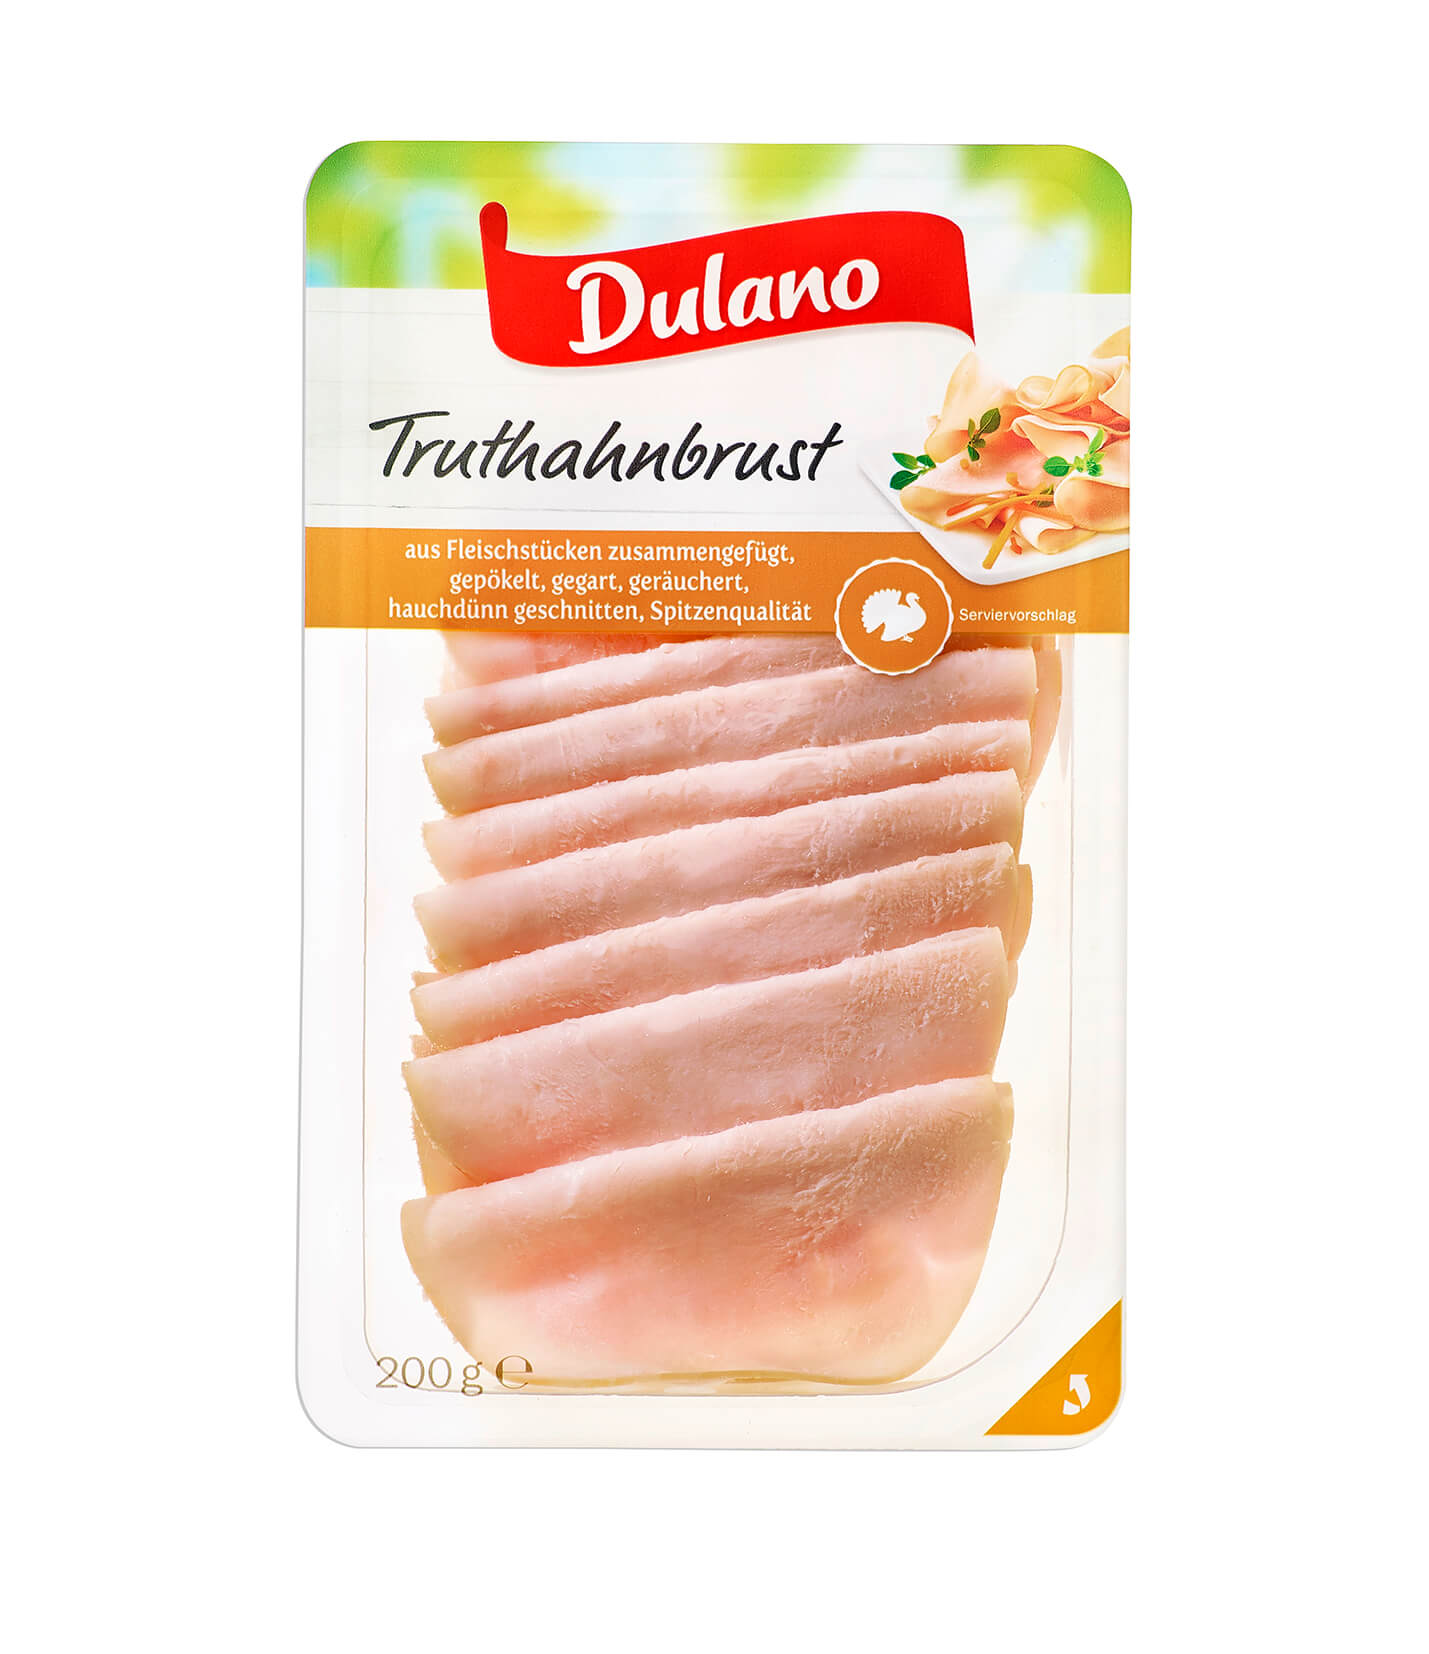 Dulano (Lidl) · Truthahnbrust Hauchdünnschnitt (200 grams) The Family  Butchers Germany GmbH Mixed Species Sausages - Prepared/Processed Food /  Beverage / Tobacco Meat/Poultry/Sausages Meat/Poultry Sausages -  Prepared/Processed · mynetfair